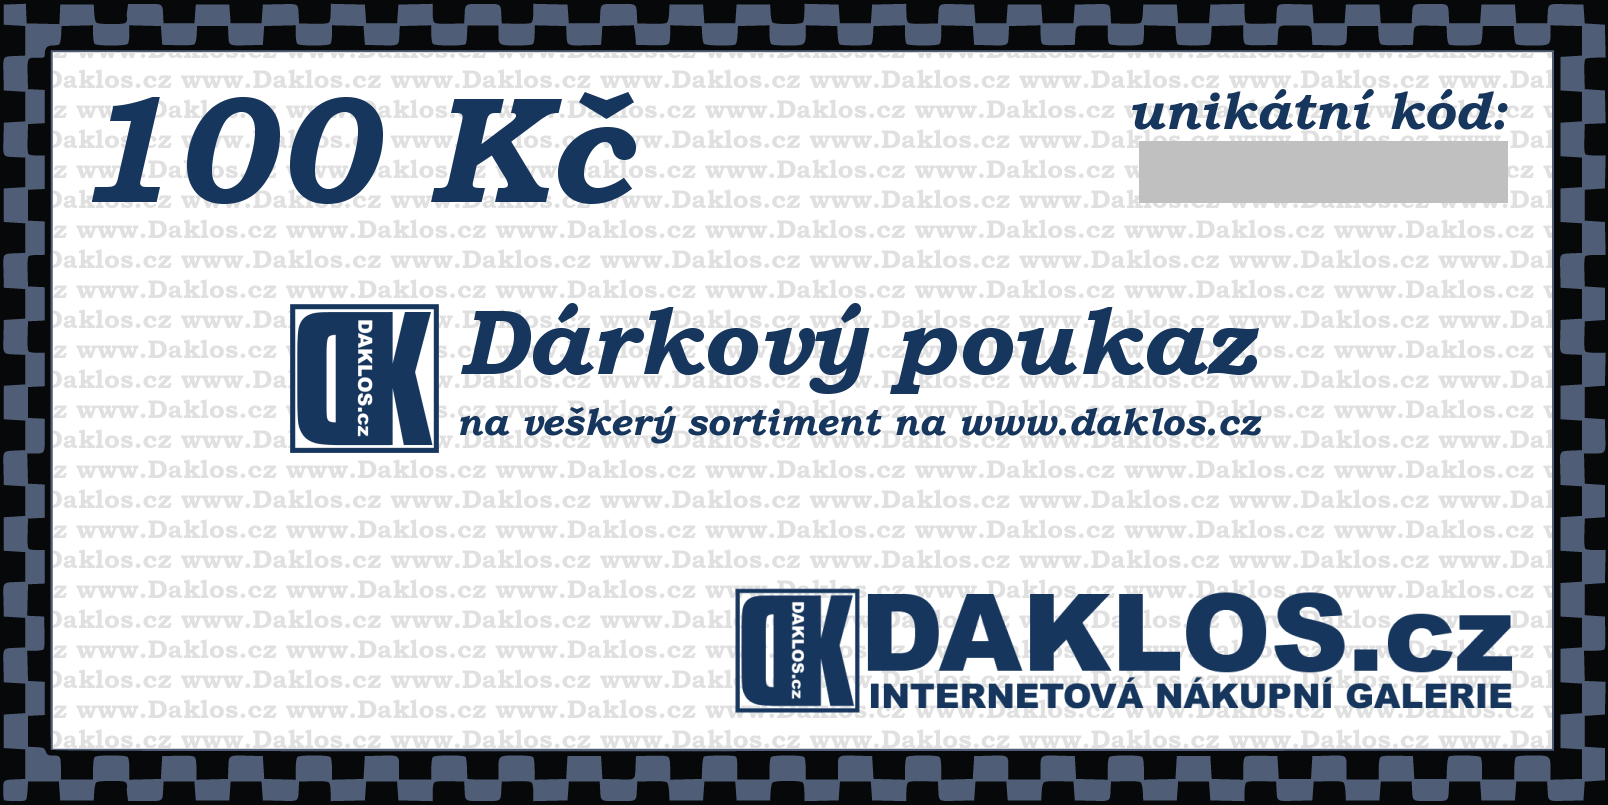 http://www.daklos.cz/index.php?id_product=1457&controller=product